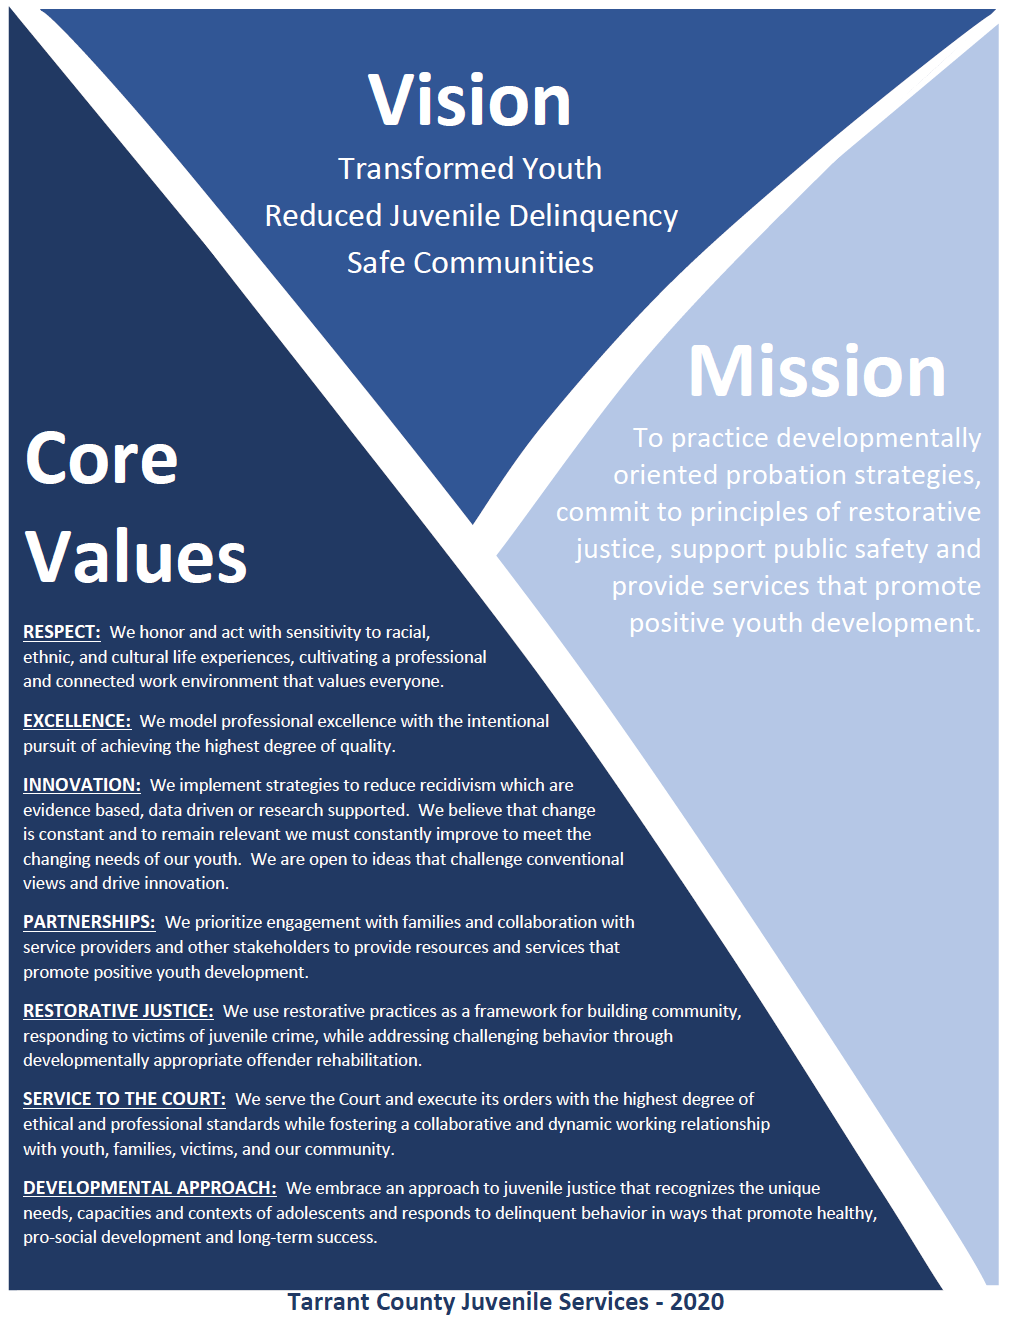 Juvenile Services Vision, Mission and Values. Click to open pdf